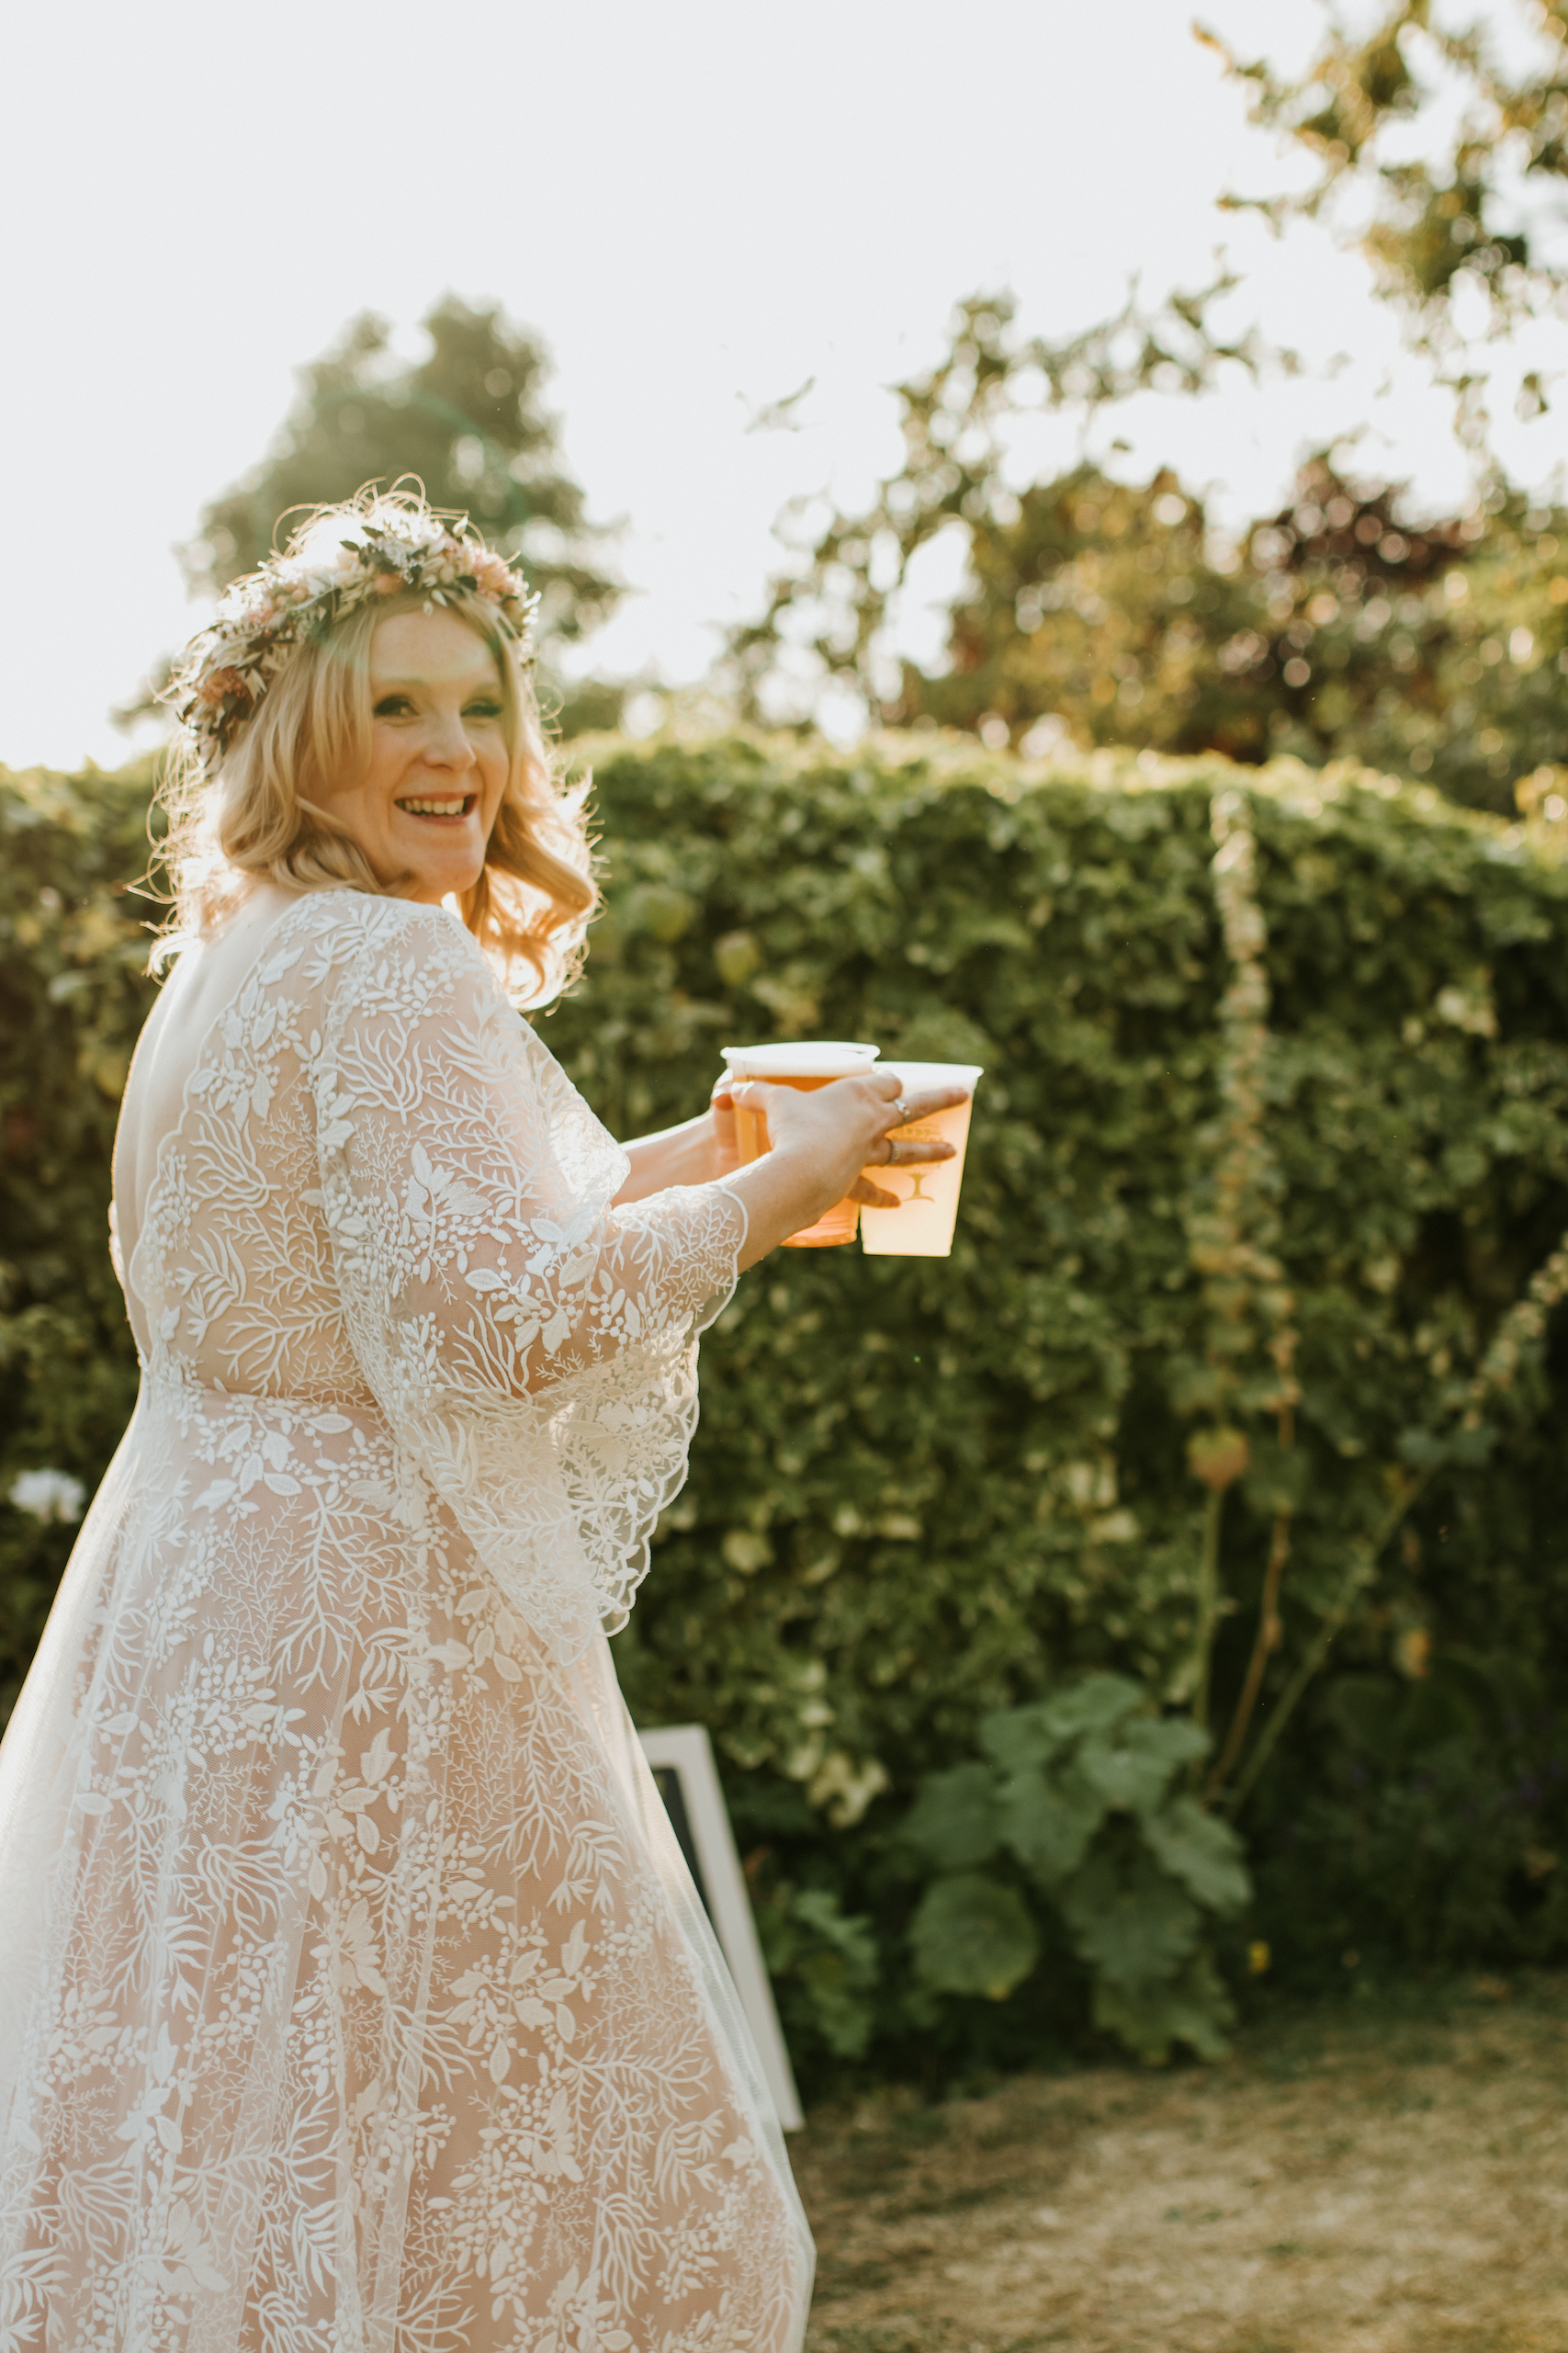 Bride wearing lace gown and floral crown | Wedding Photographer in Buckinghamshire